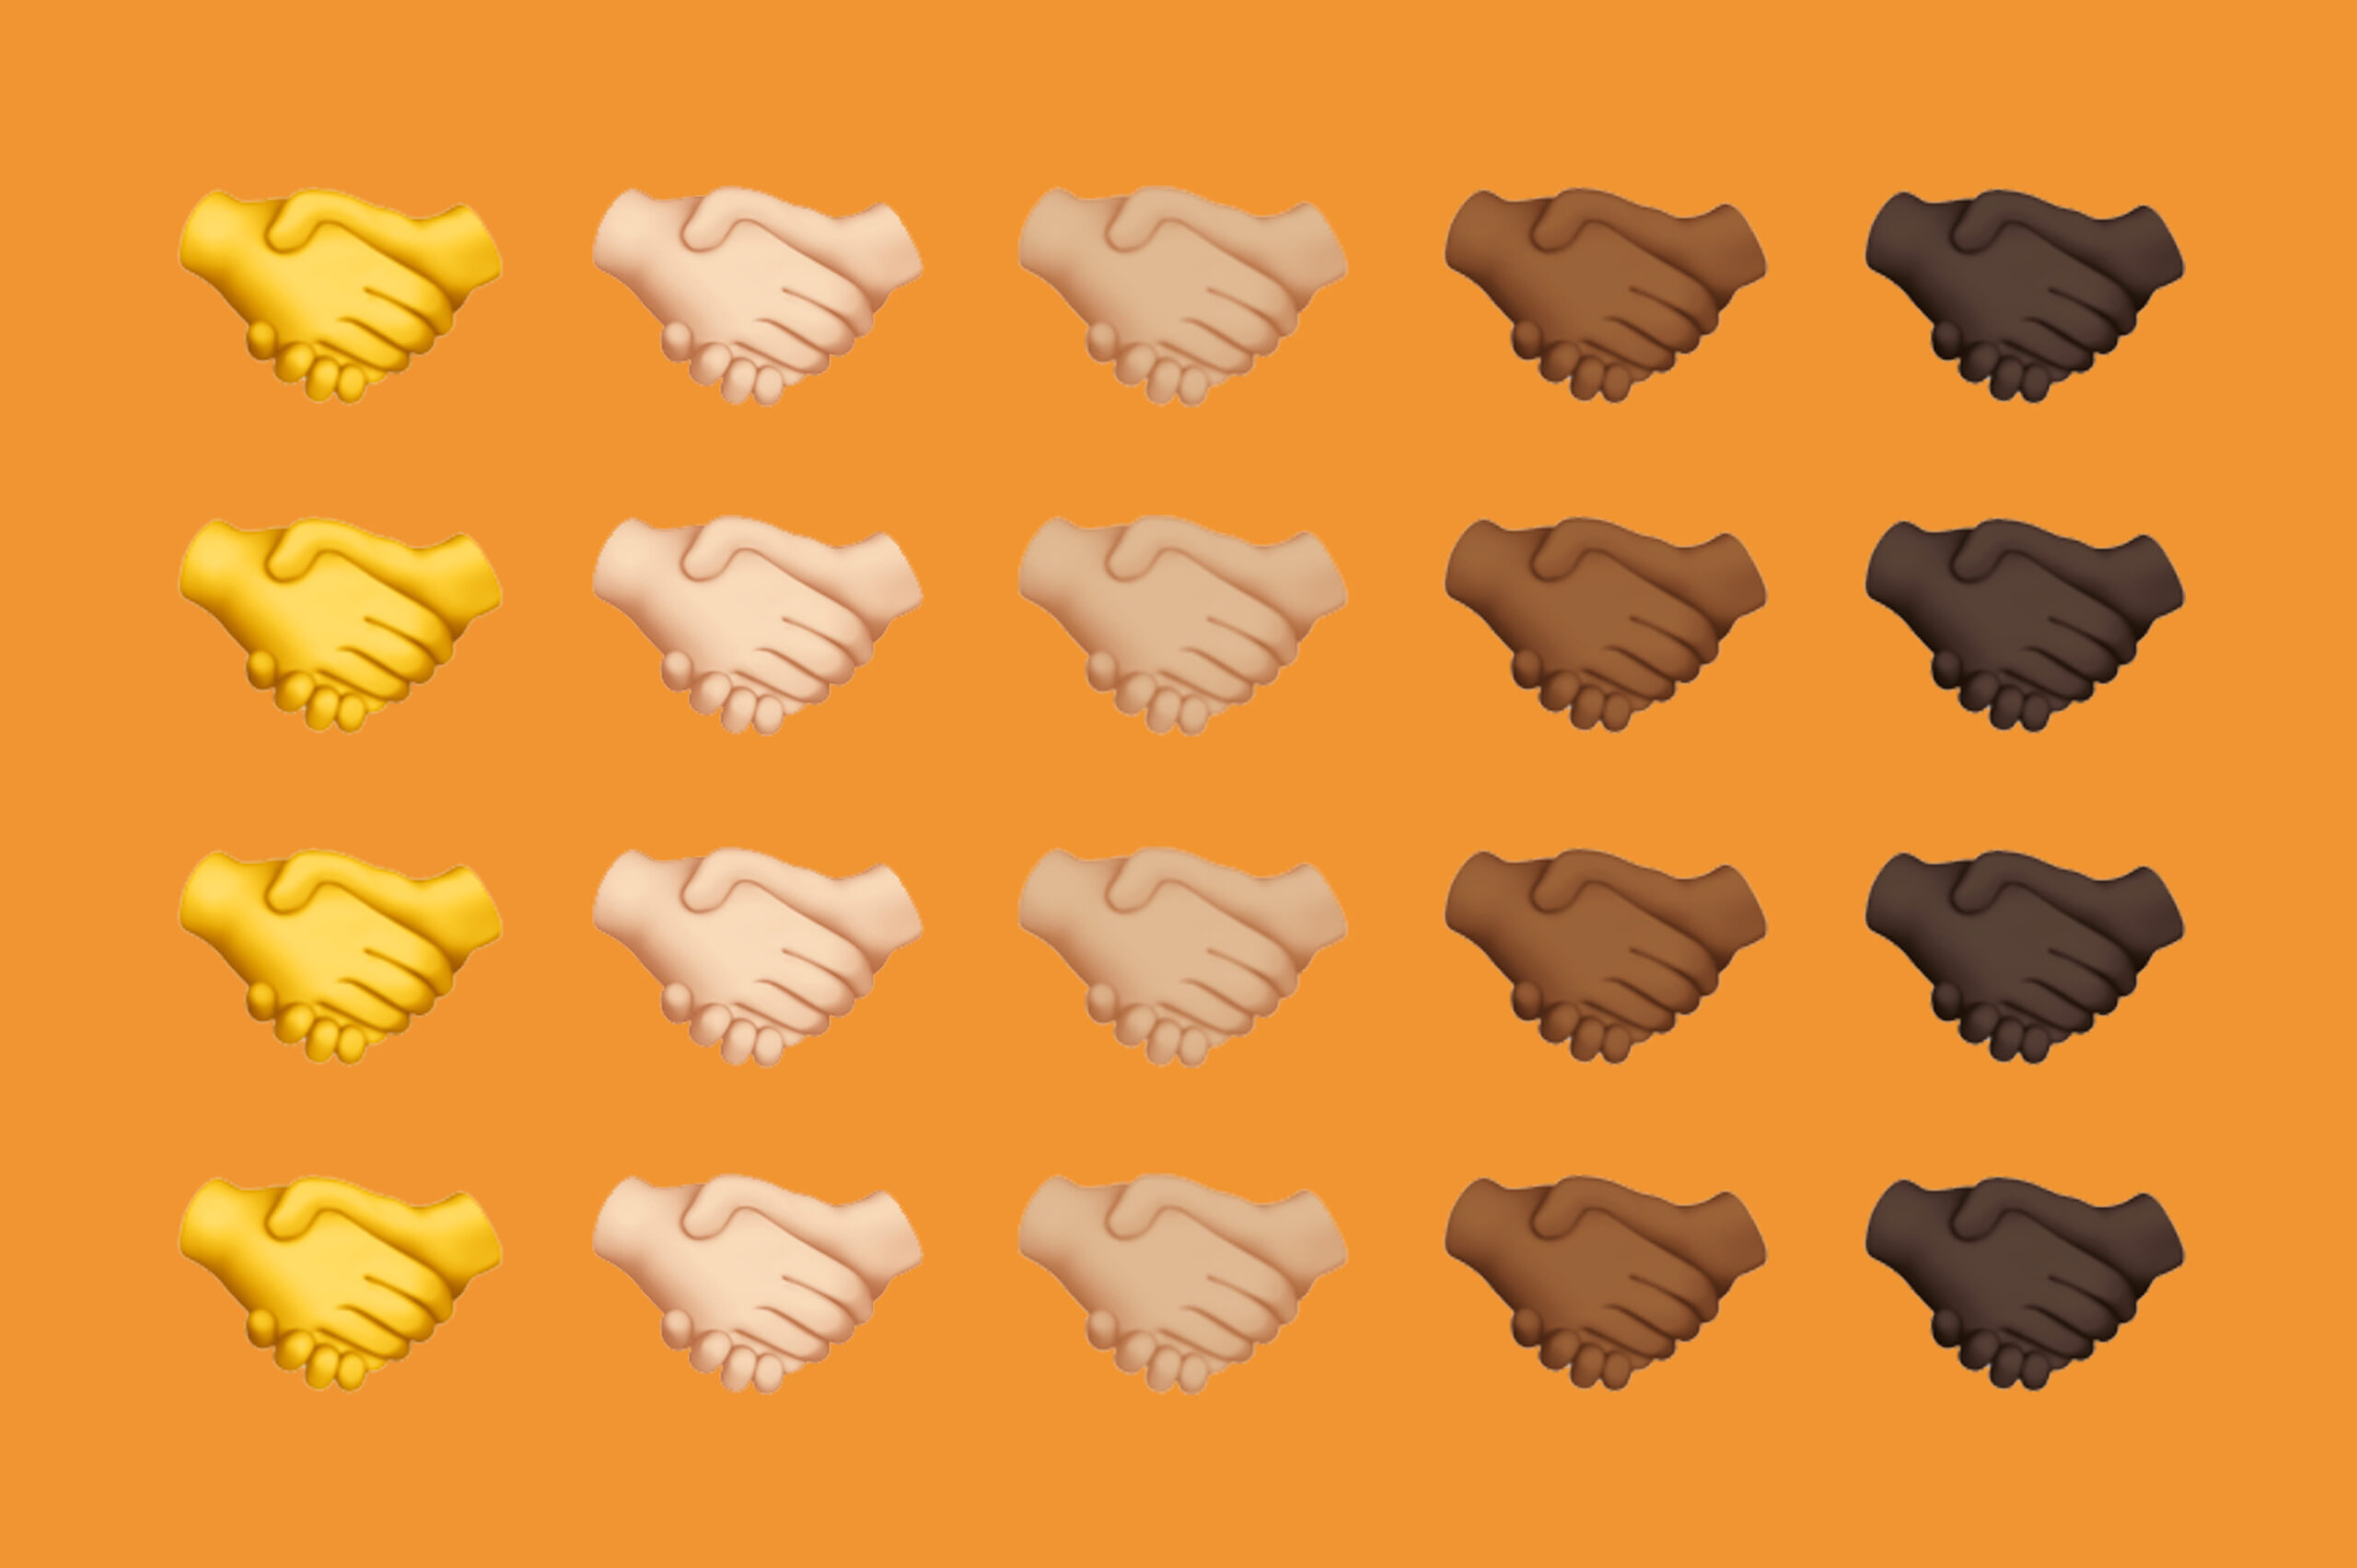 Why skin tone modifiers don't work for ?, explained by an emoji historian